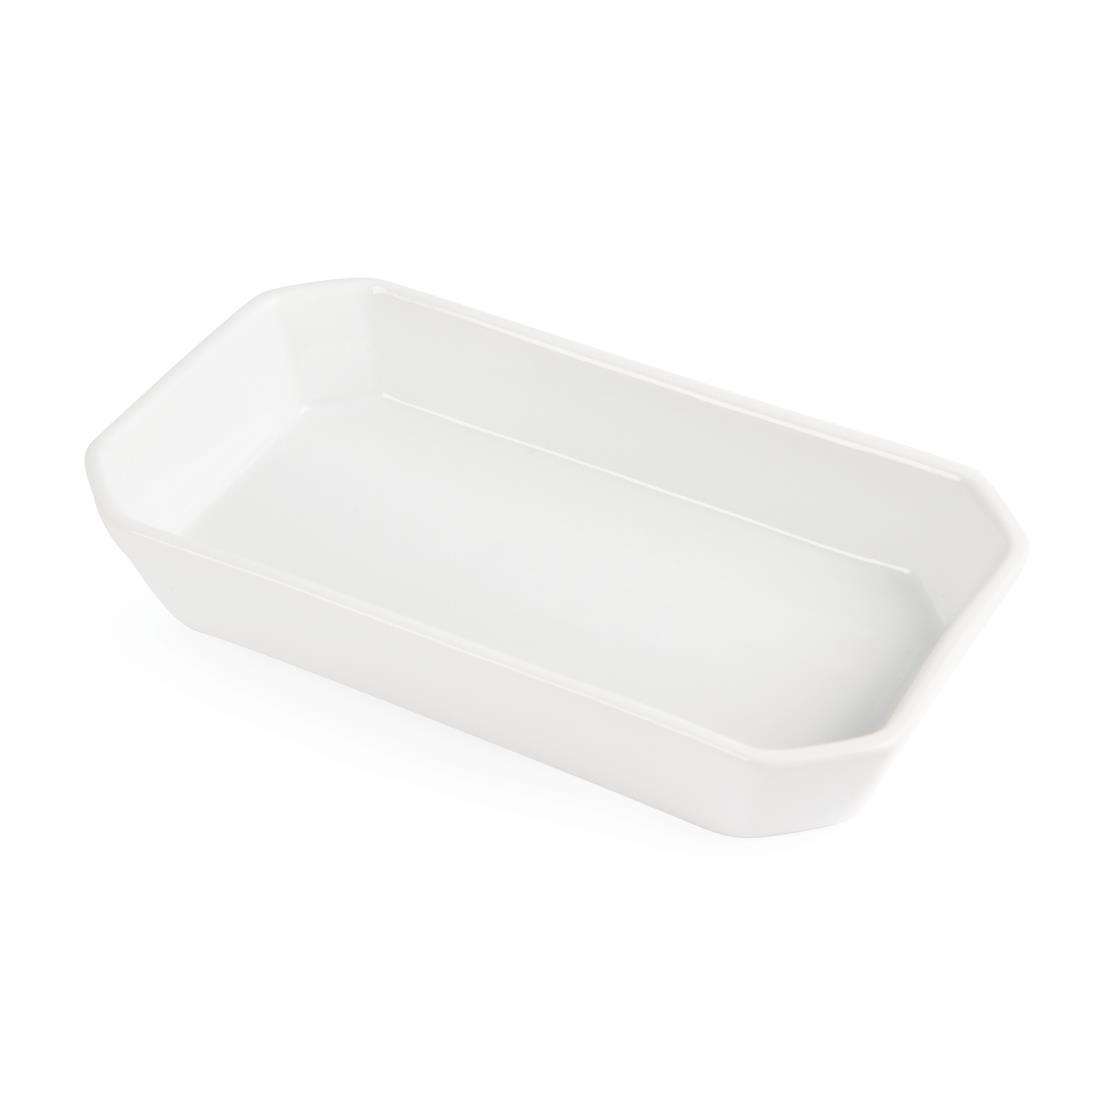 Olympia Whiteware Oblong Hors d'Oeuvre Dishes 235x 122mm (Pack of 6) - W438  - 4